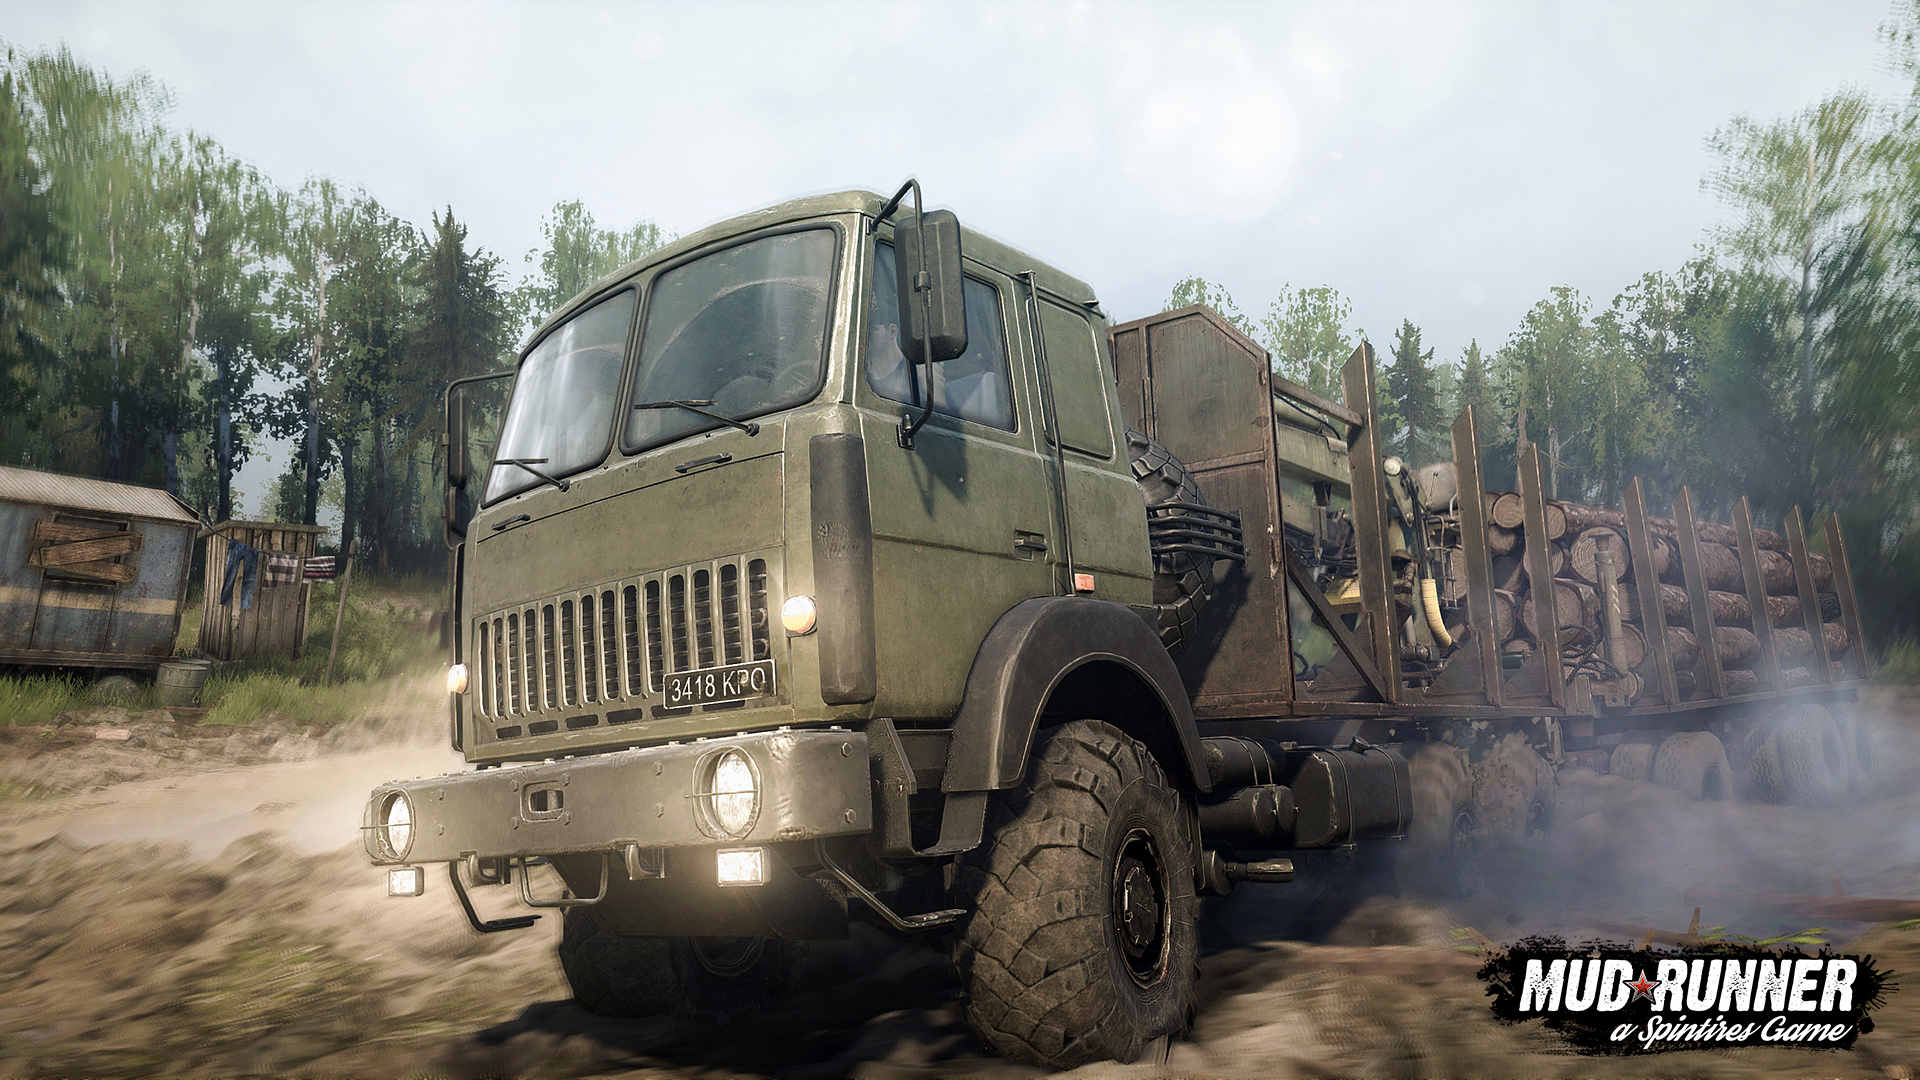 download spintires free for mac